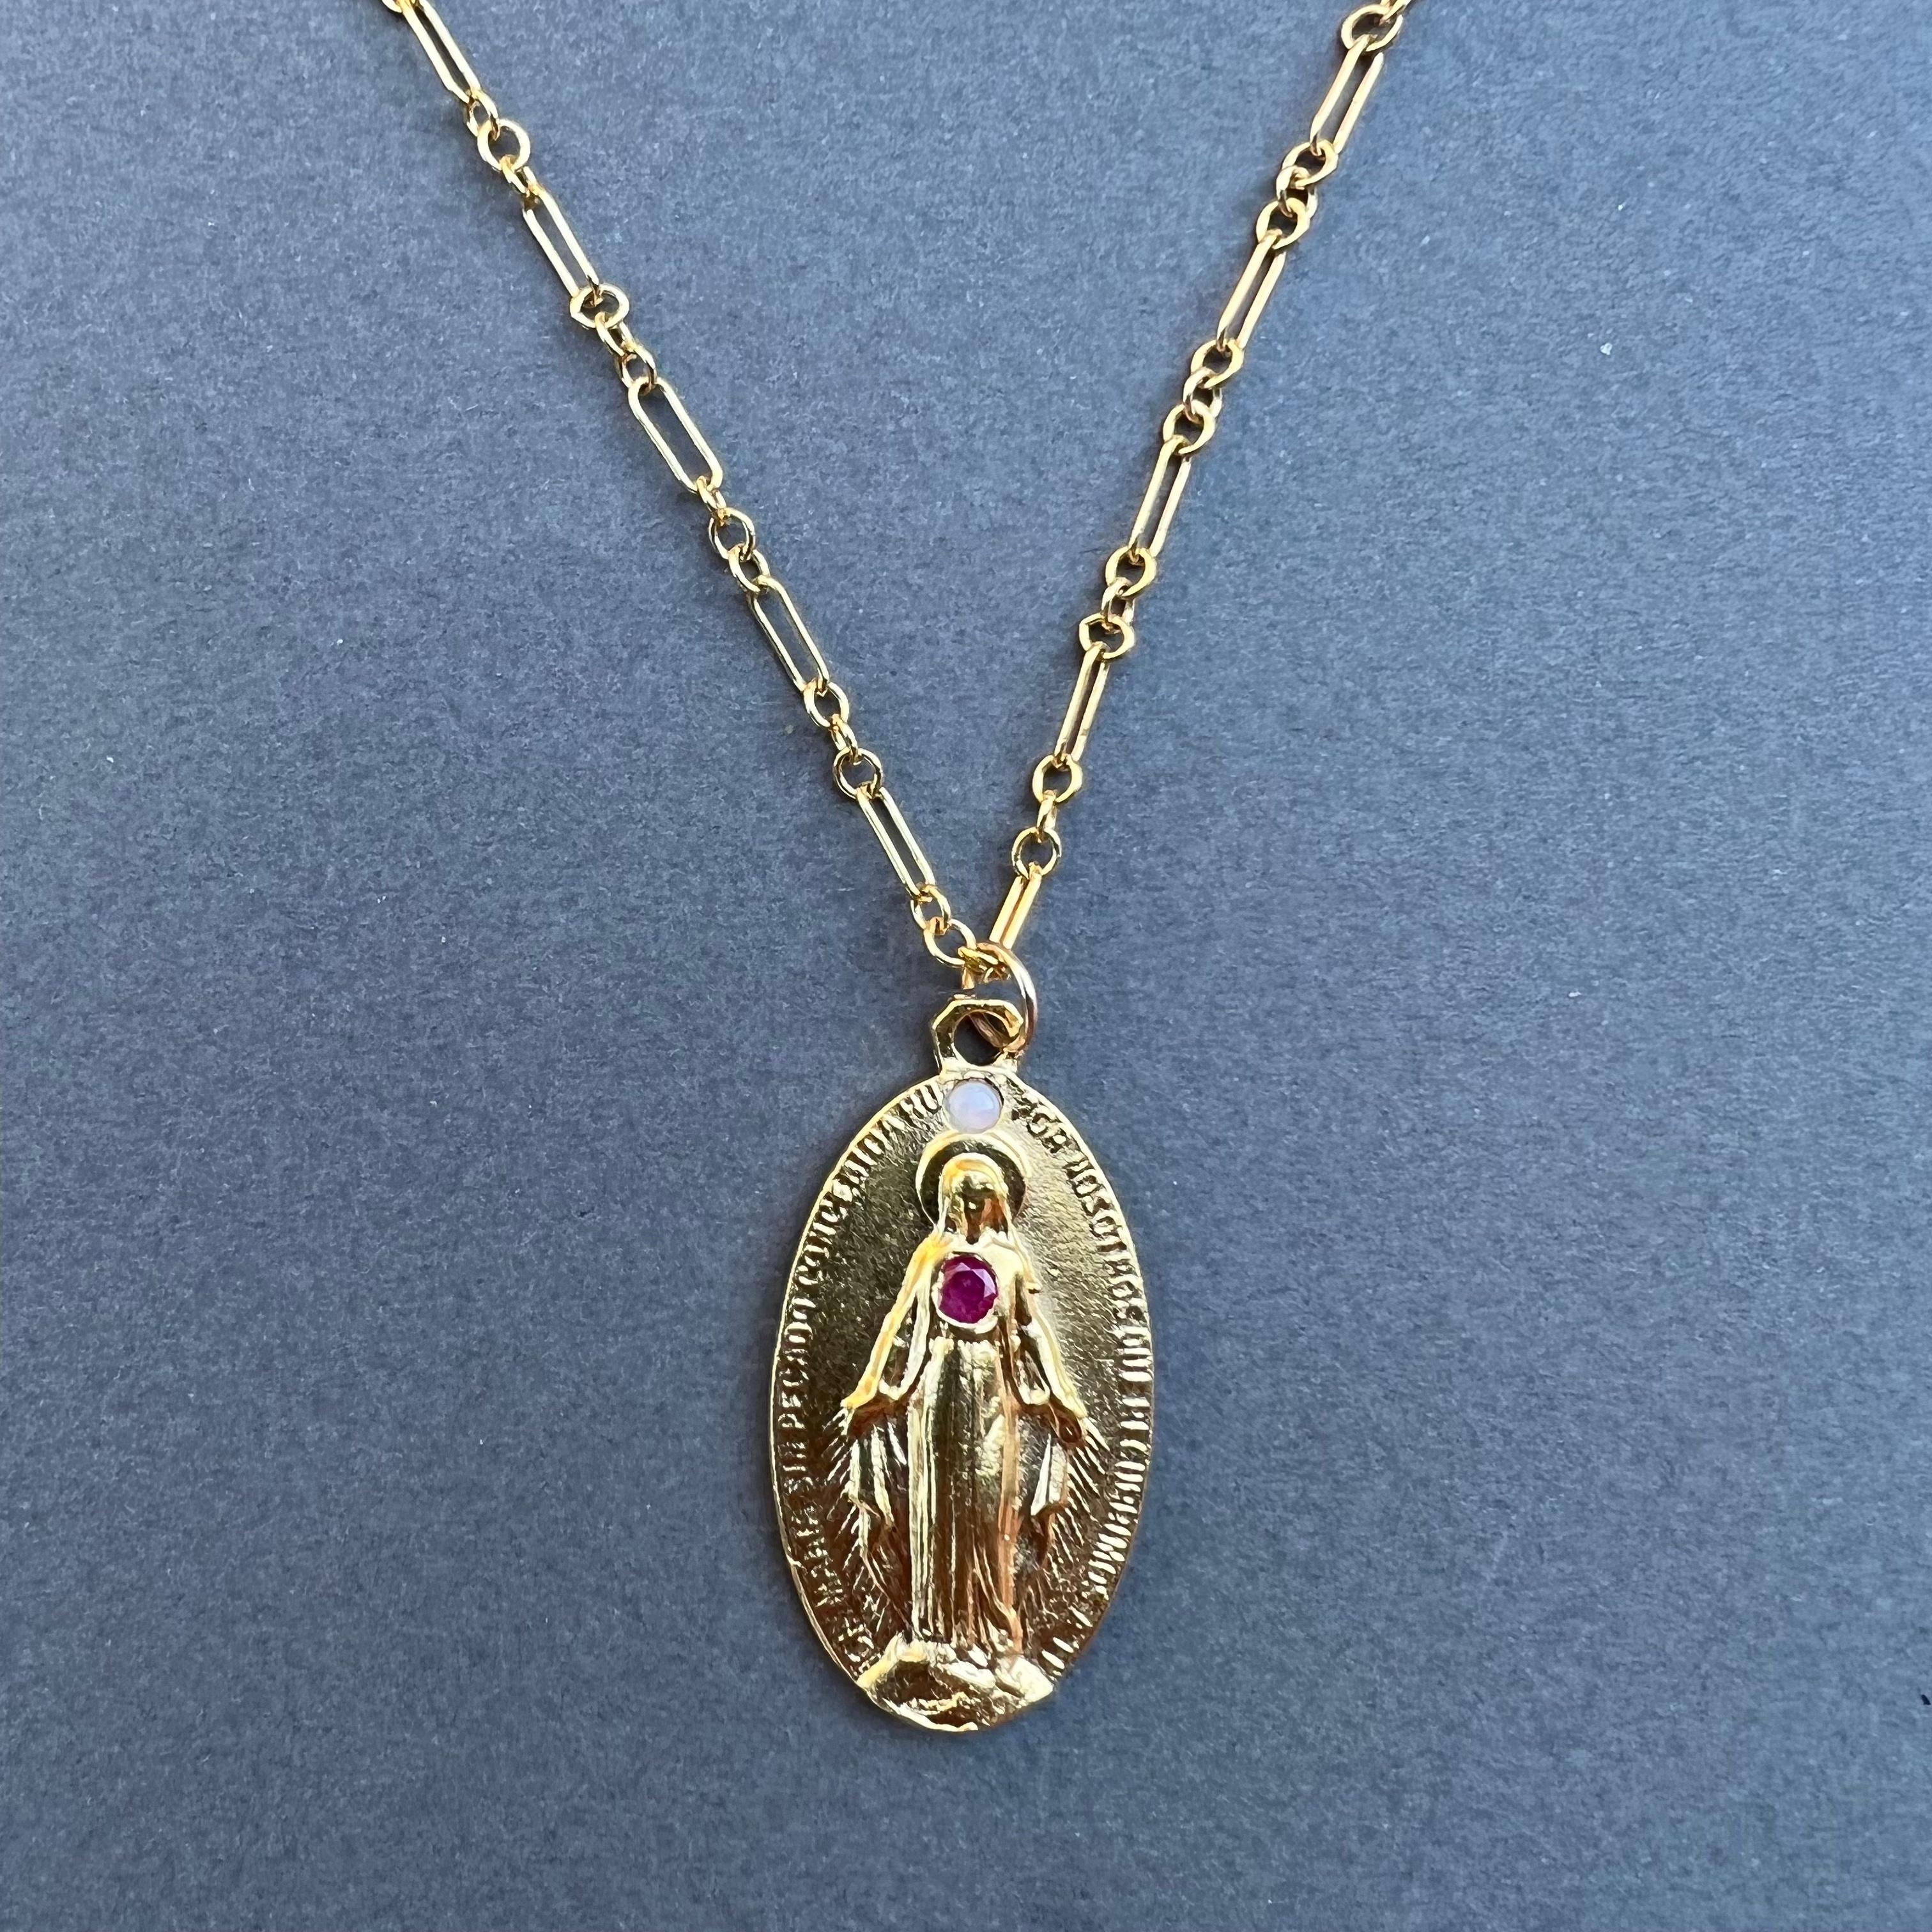 Virgin Mary Ruby Opal Medal Chain Necklace J Dauphin For Sale 4